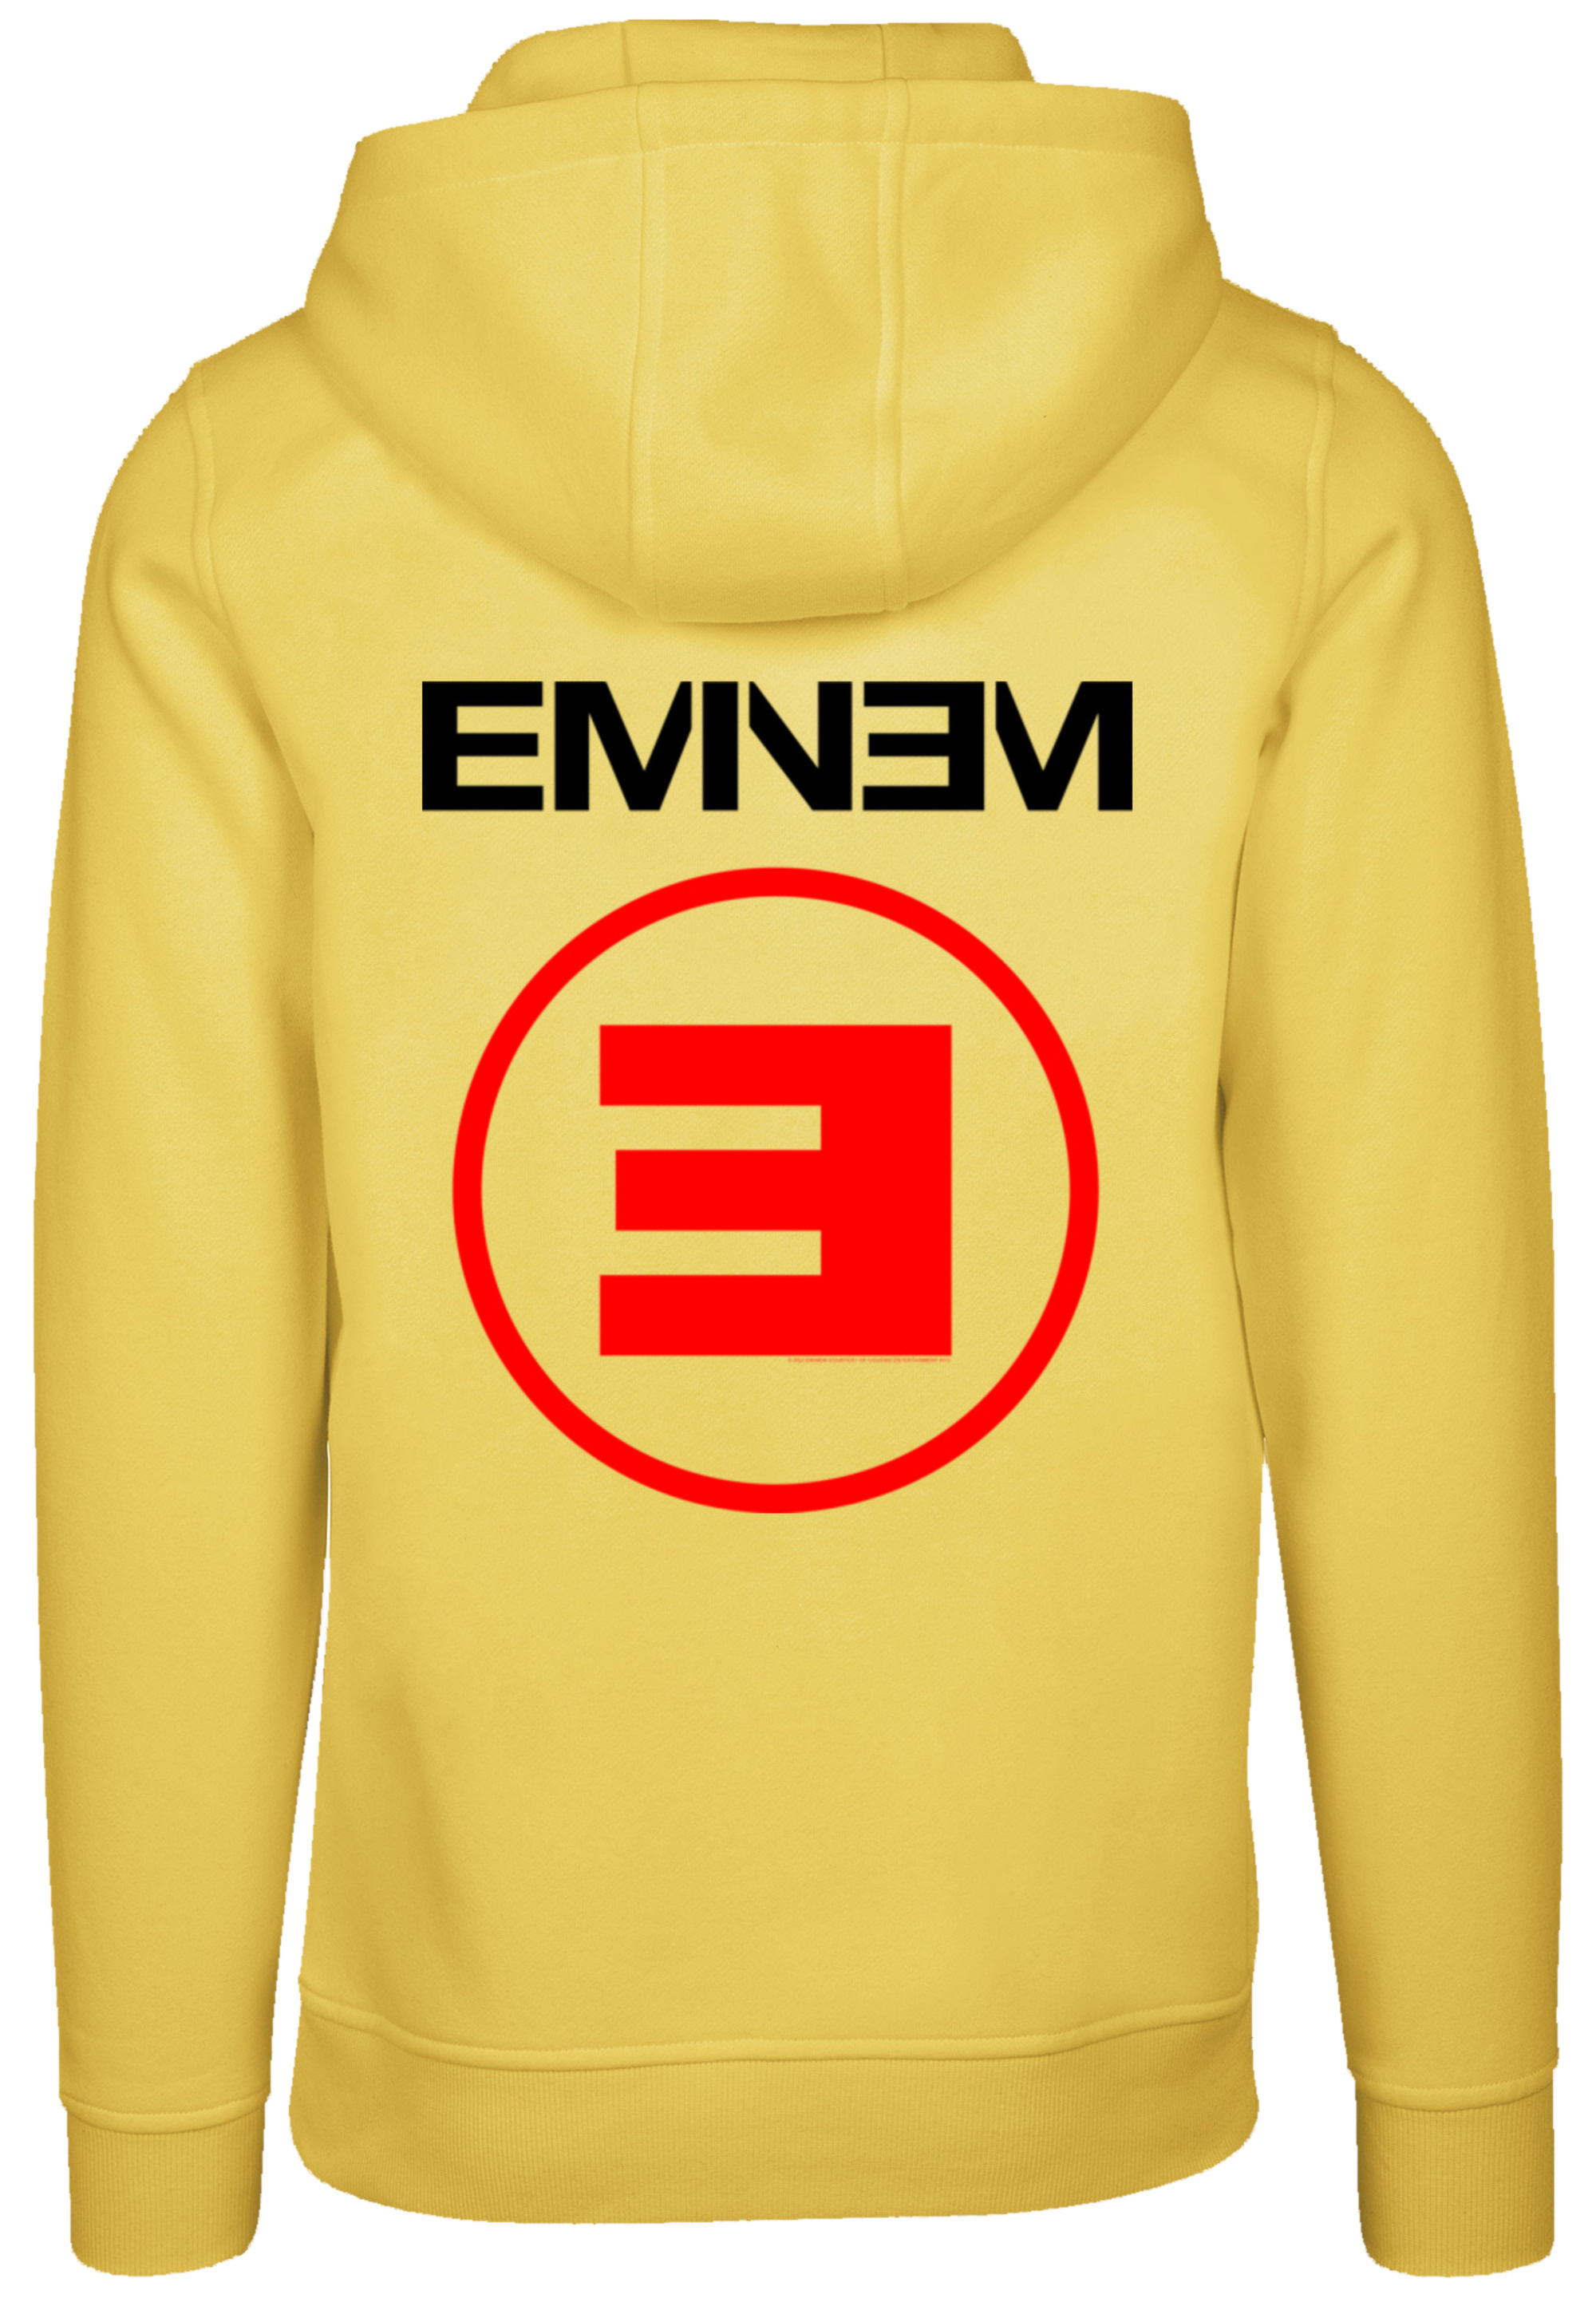 Пуловер F4NT4STIC Hoodie Eminem E Rap Hip Hop Music, цвет taxi yellow taxi top light new led roof taxi sign 12v with magnetic base white taxi dome light